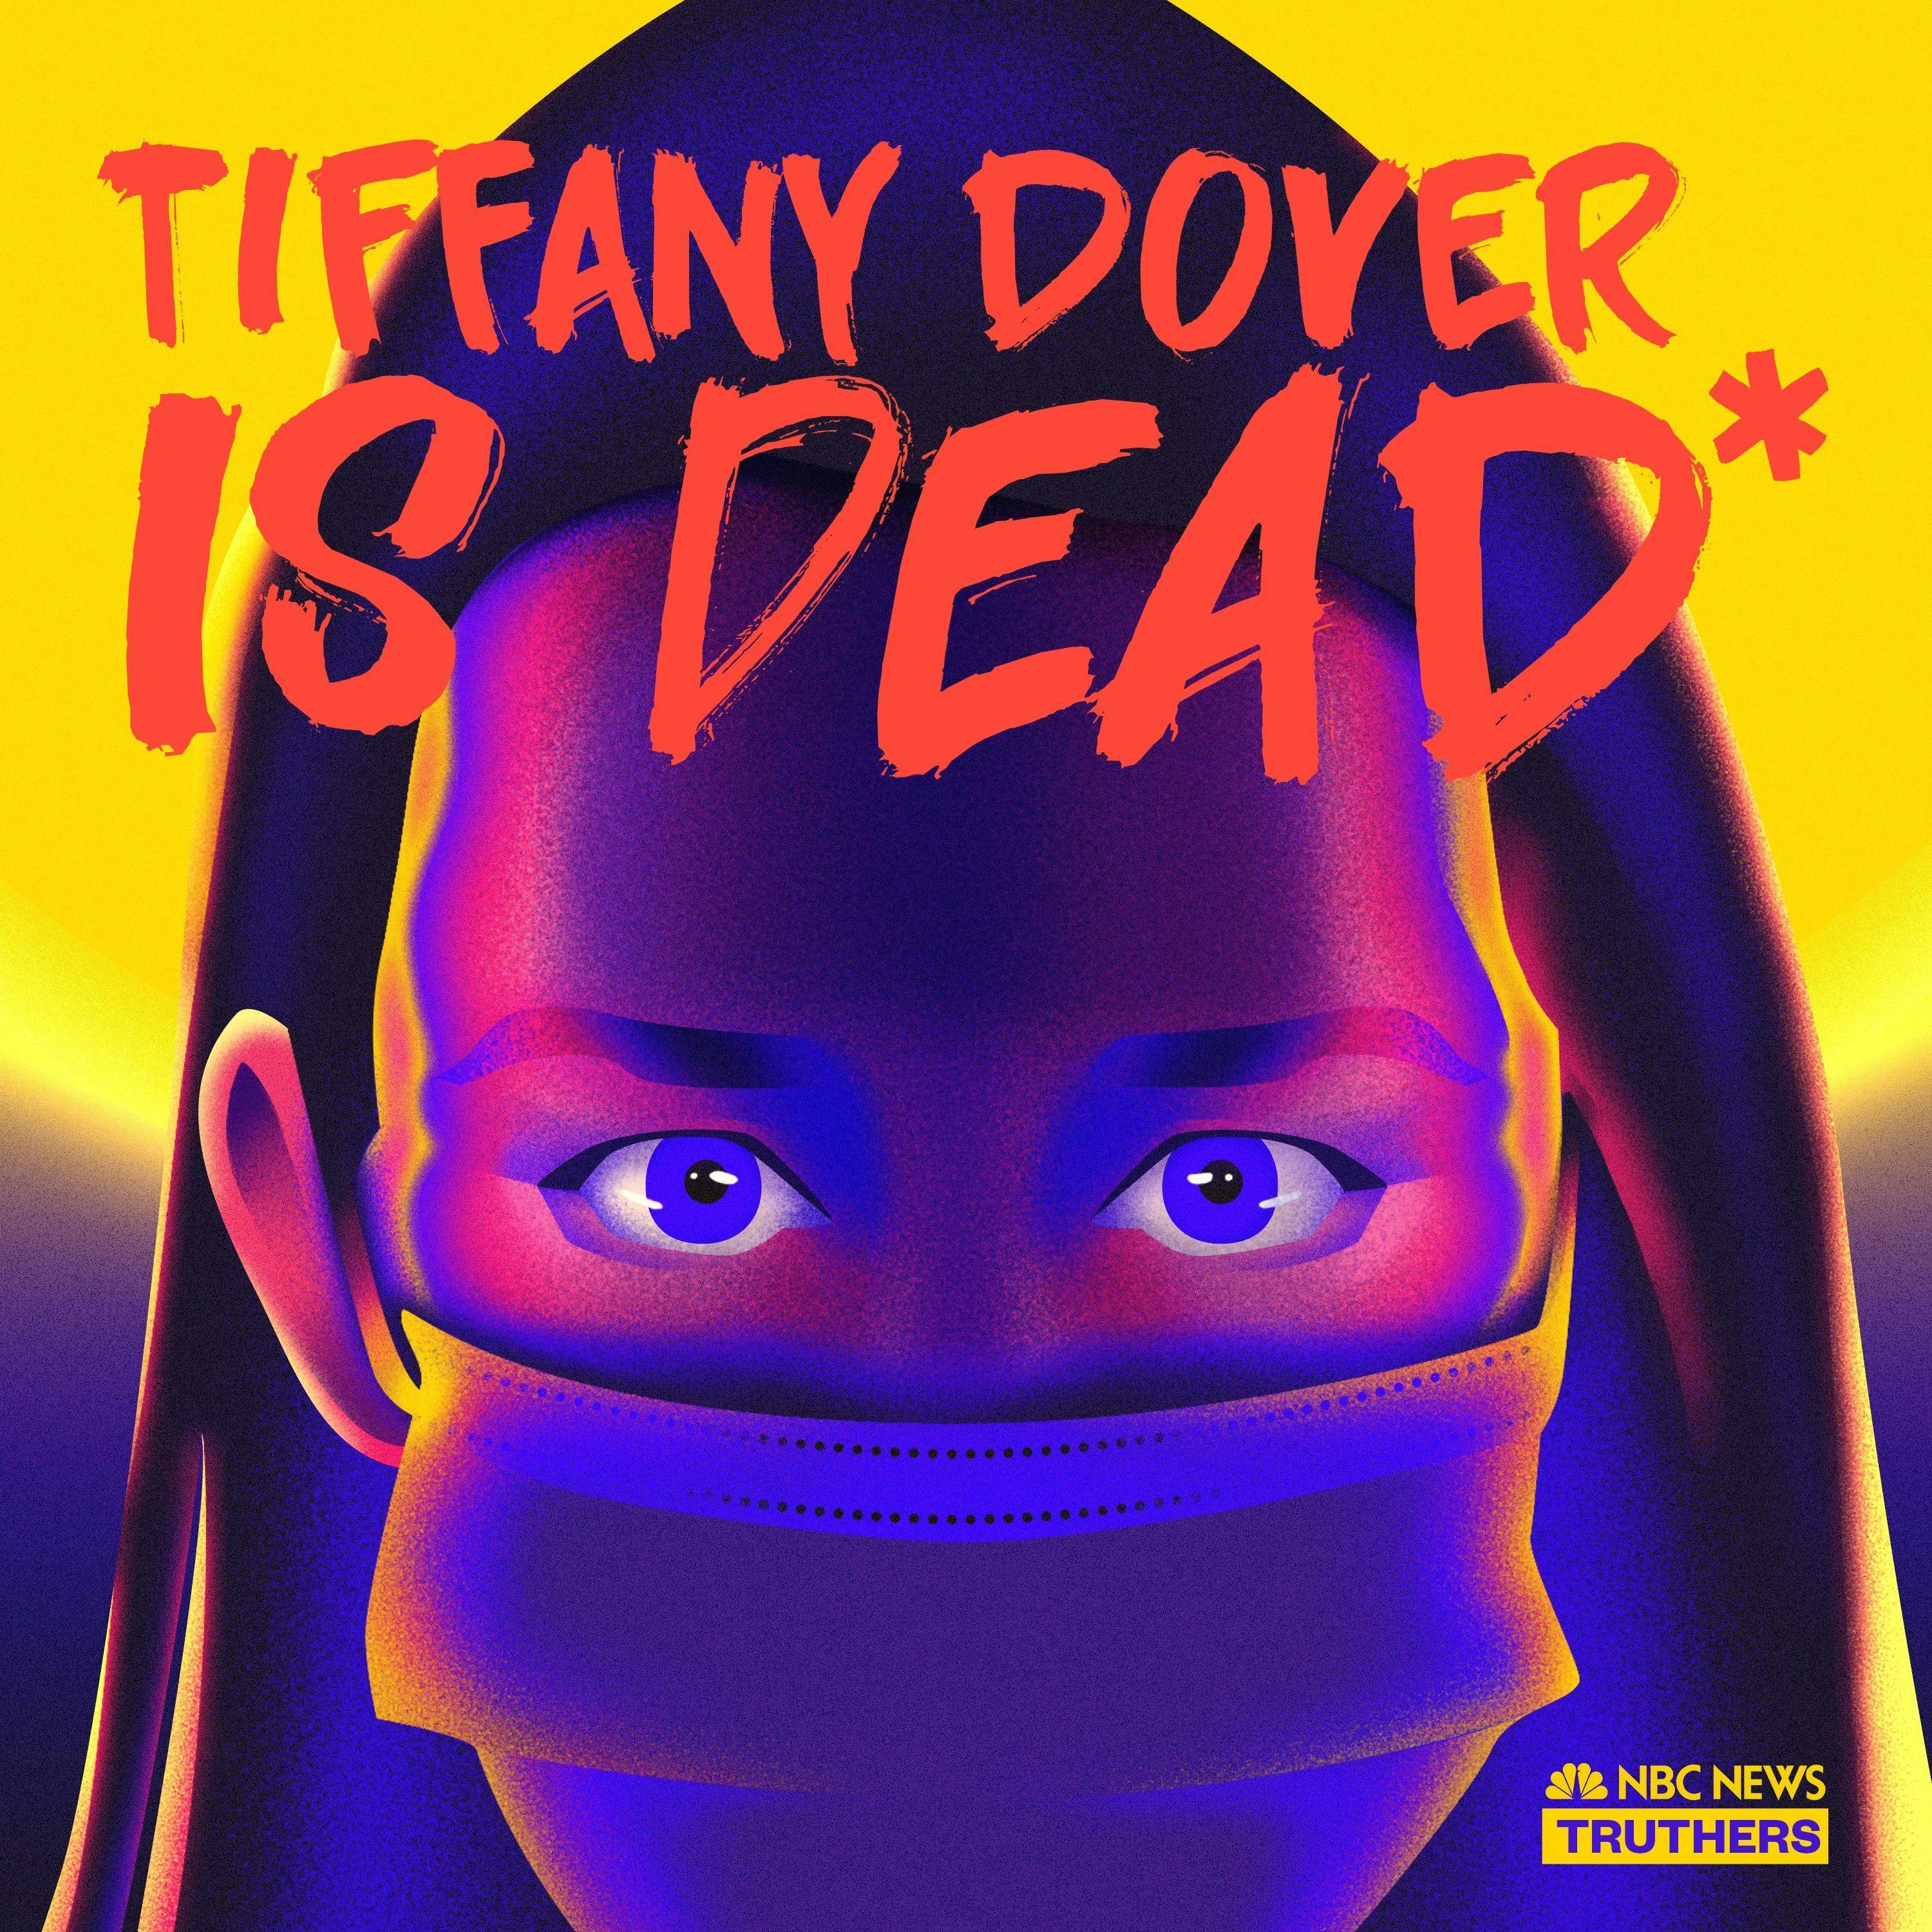 Truthers: Tiffany Dover Is Dead